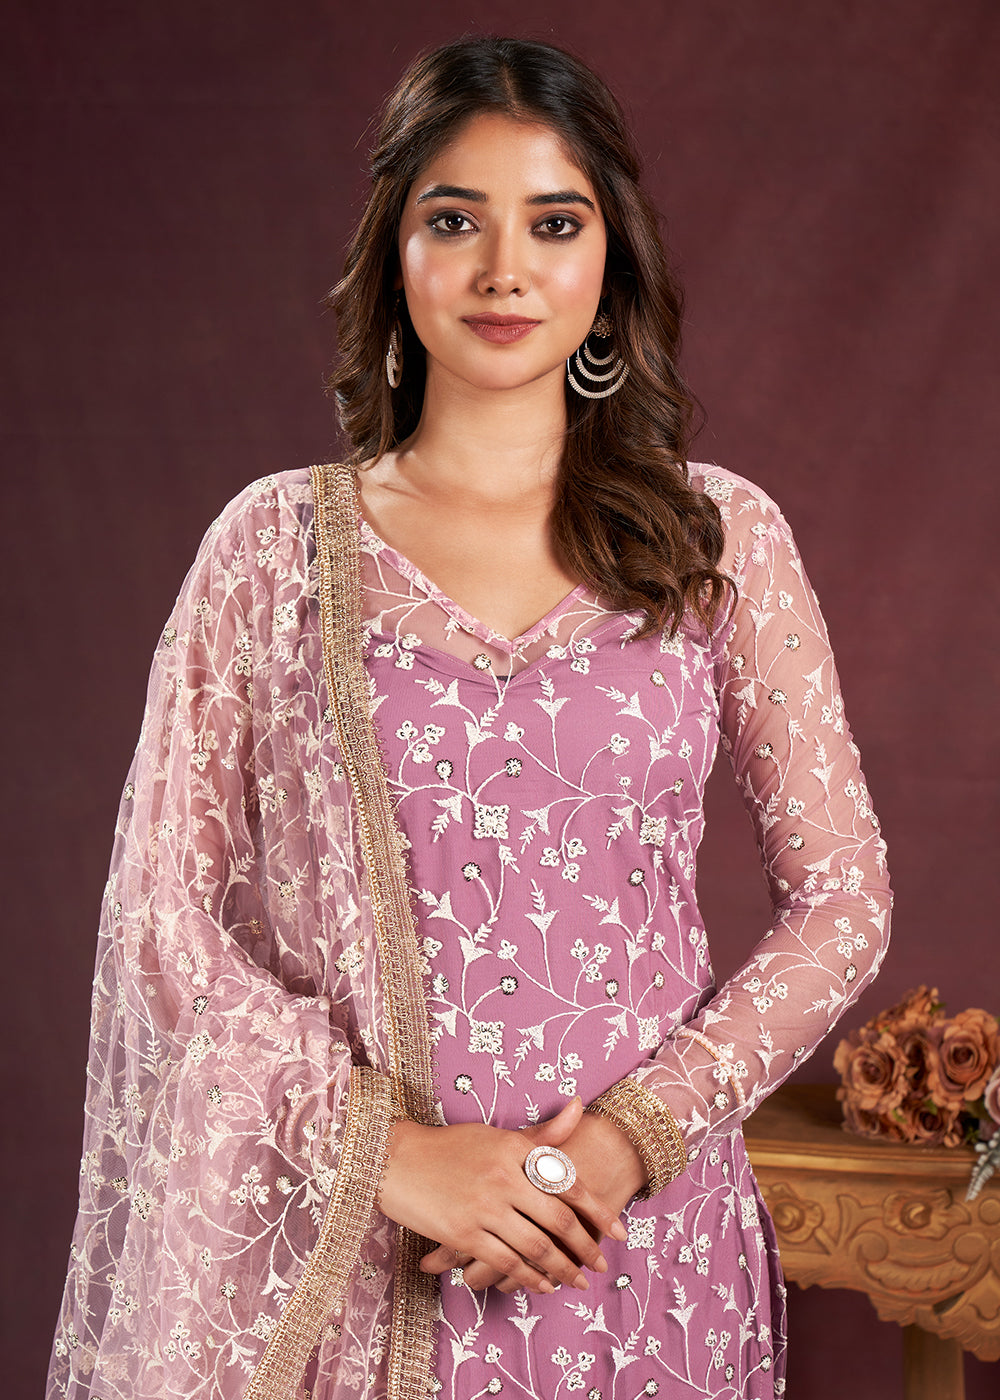 Buy Now Pink Butterfly Net Embroidered Festive Salwar Suit Online in USA, UK, Canada, Germany, Australia & Worldwide at Empress Clothing.